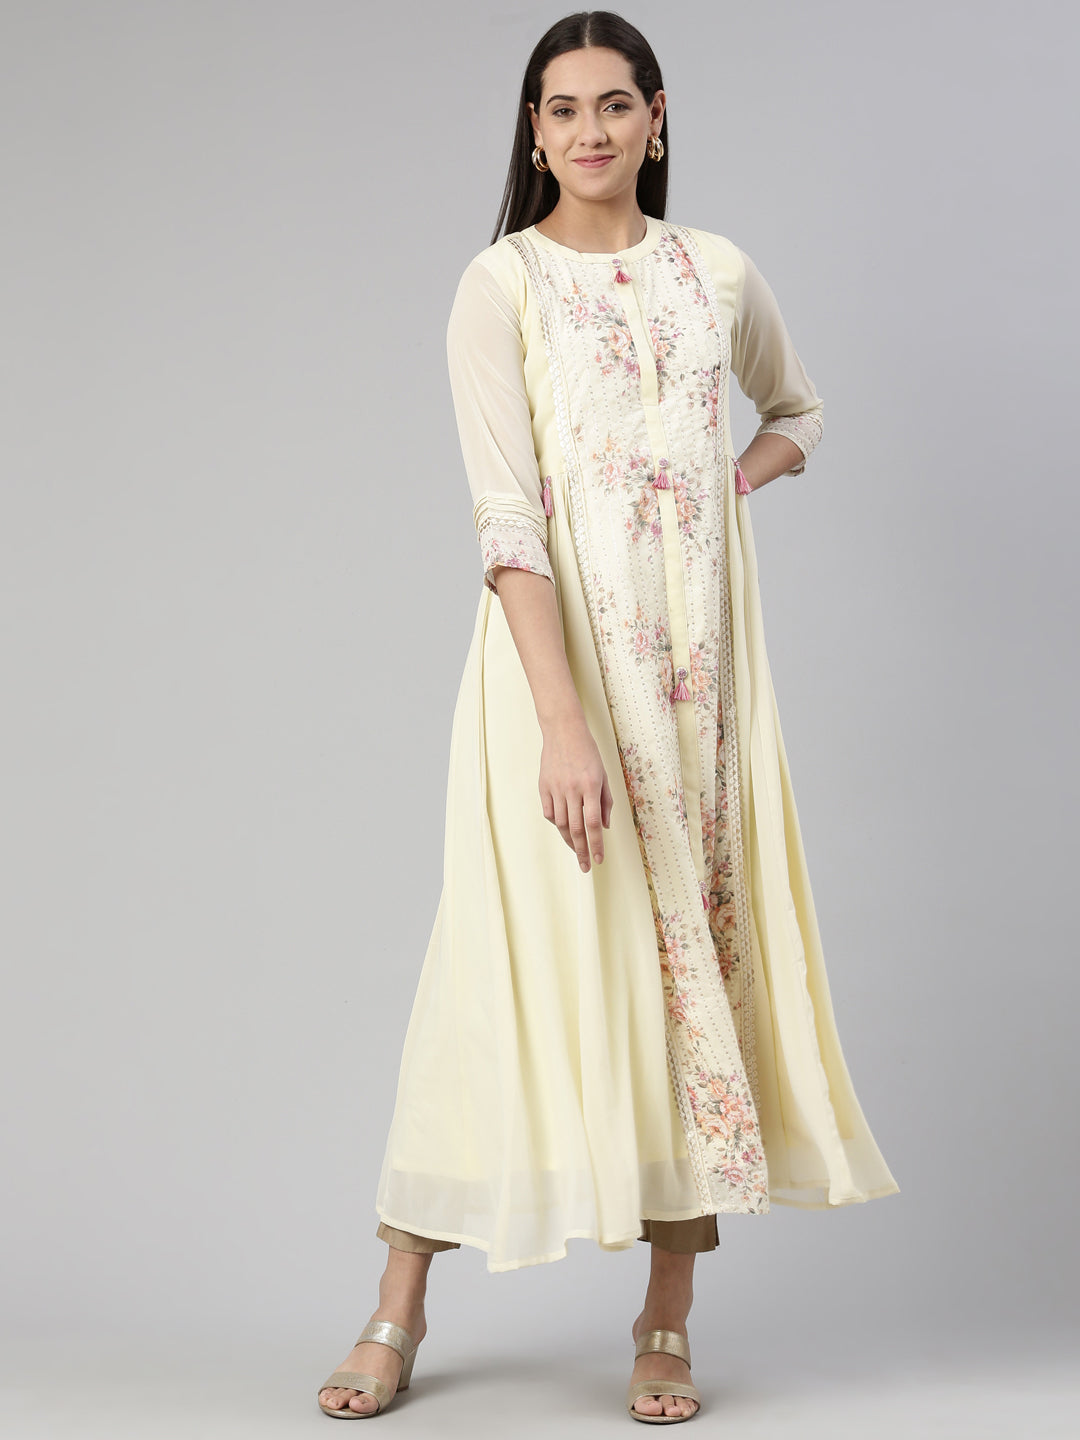 Ethnic Couture Brand, Neeru's Has Opened In Pune | LBB